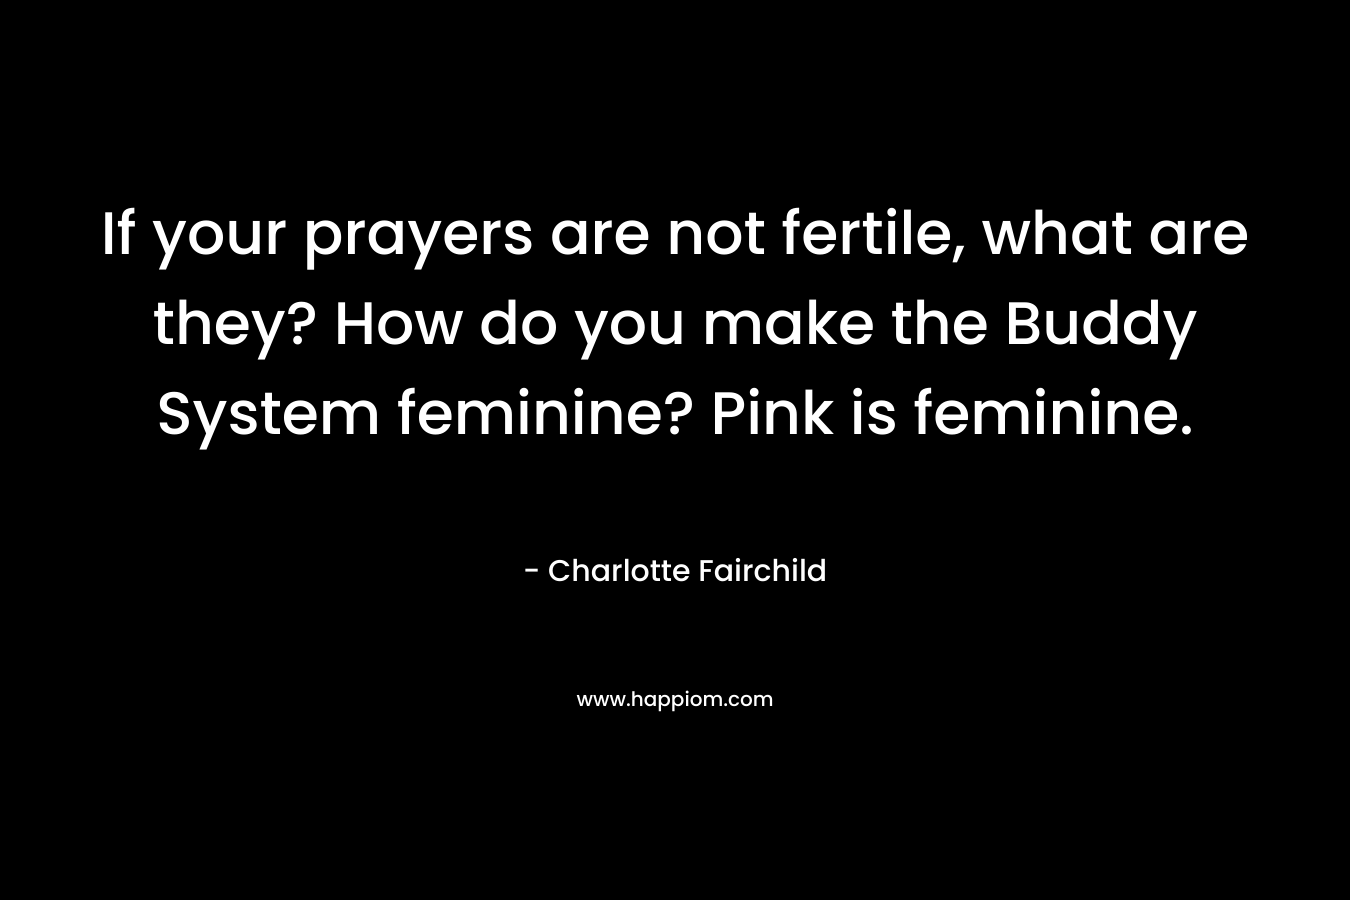 If your prayers are not fertile, what are they? How do you make the Buddy System feminine? Pink is feminine.